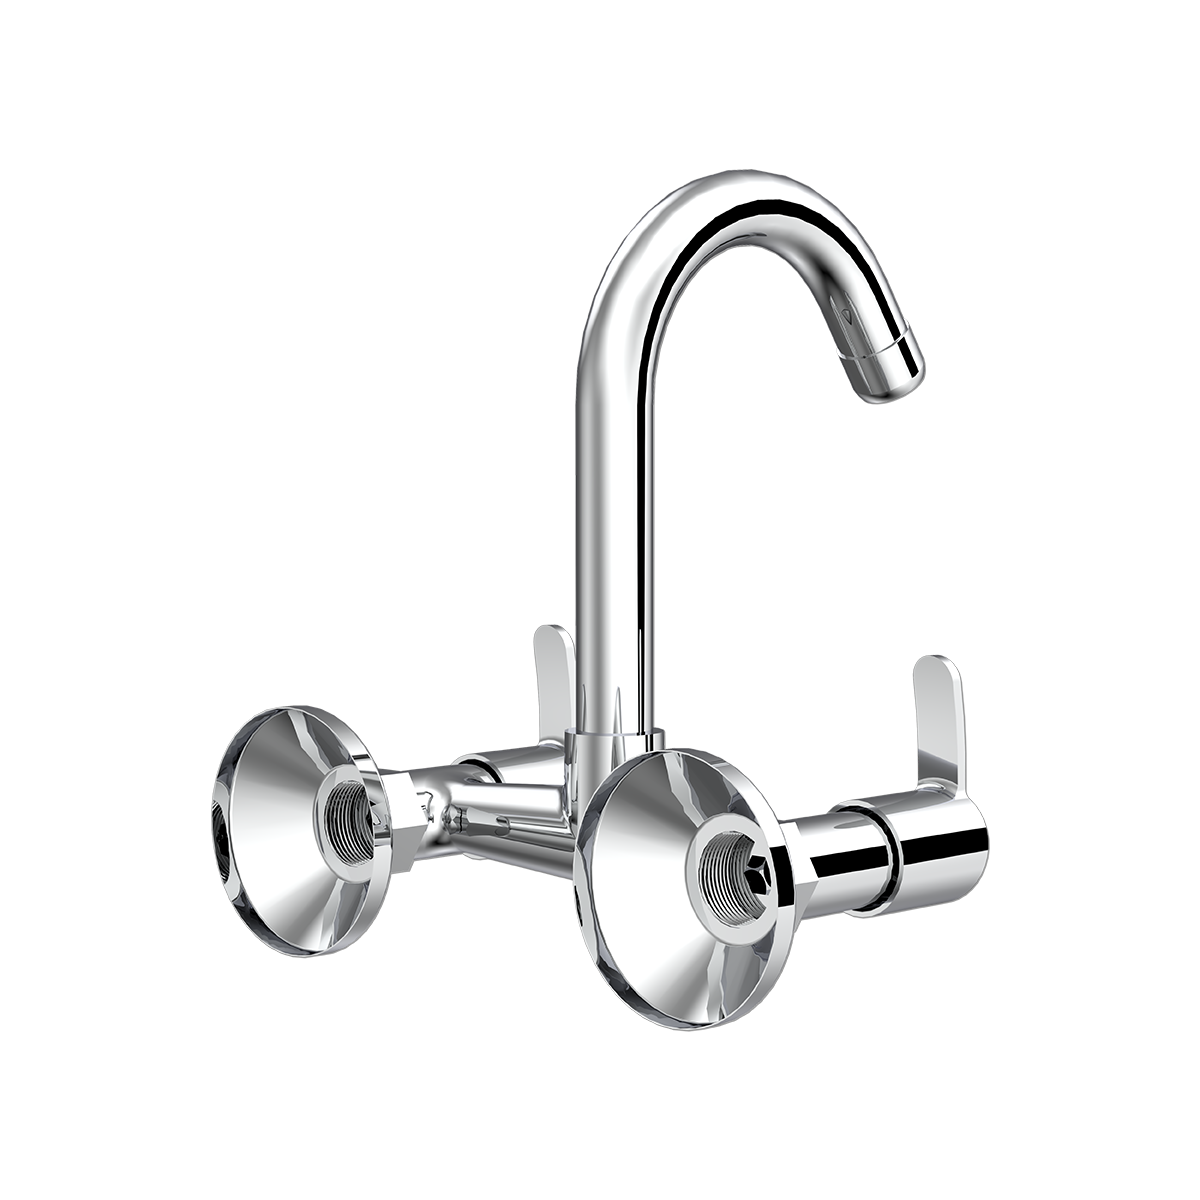 Wall Mounted Sink Mixer With Swivel Spout